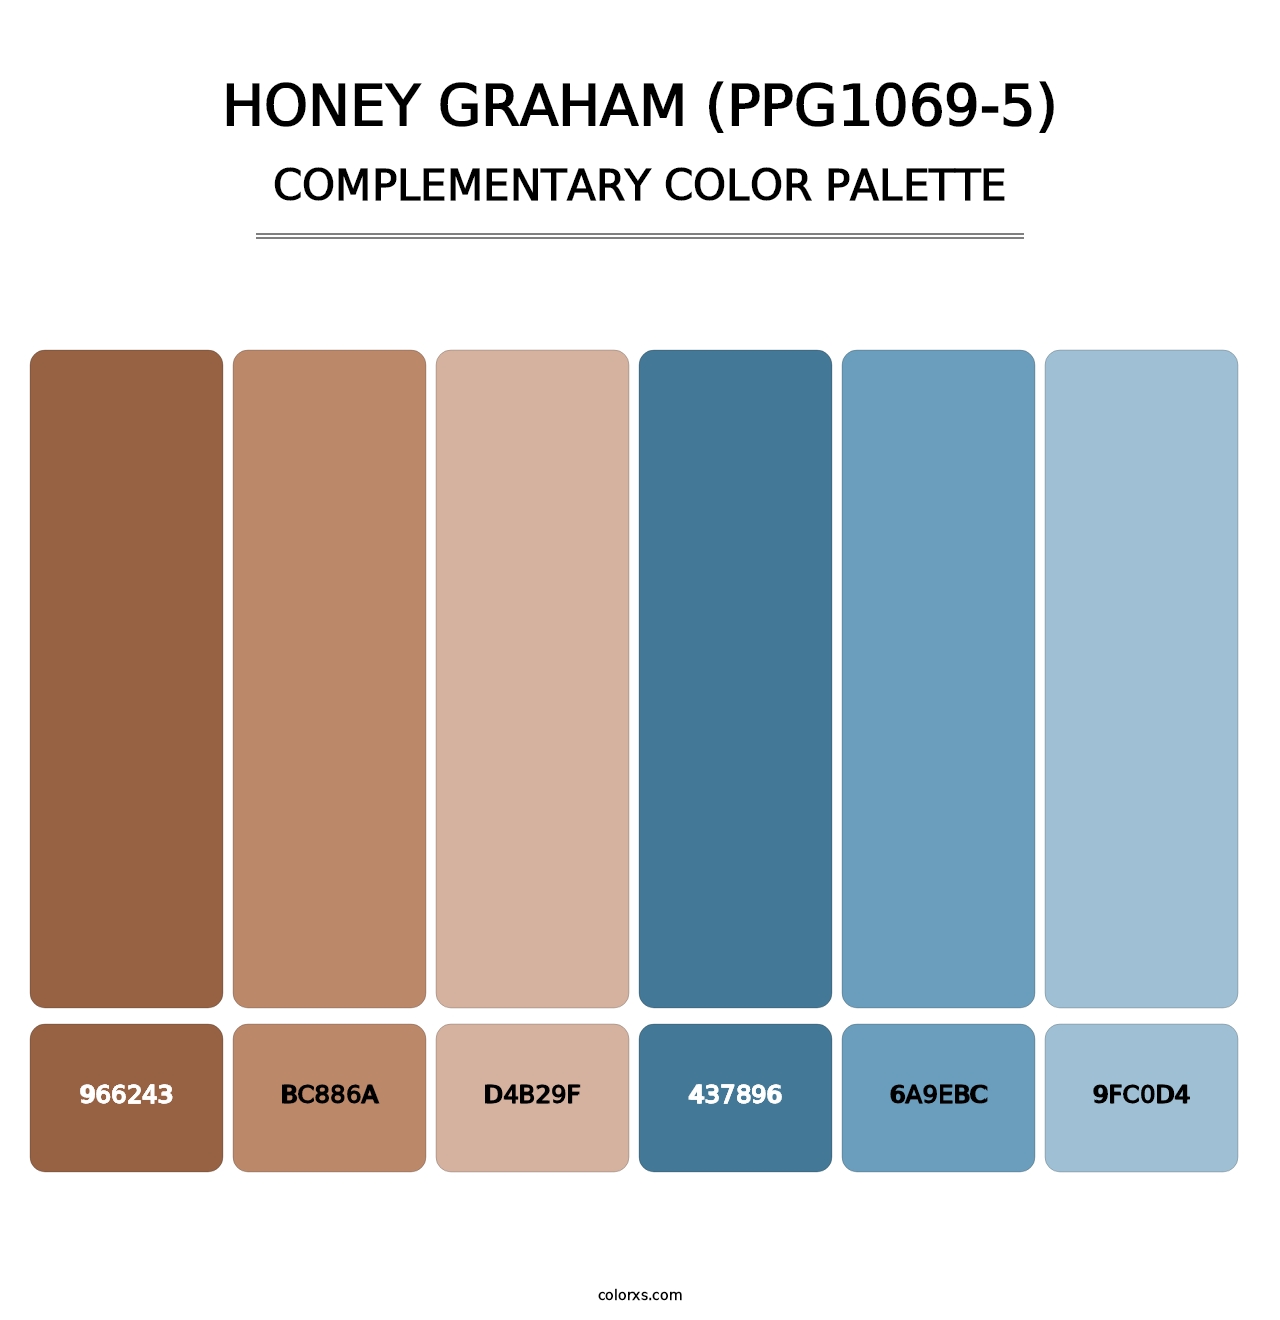 Honey Graham (PPG1069-5) - Complementary Color Palette